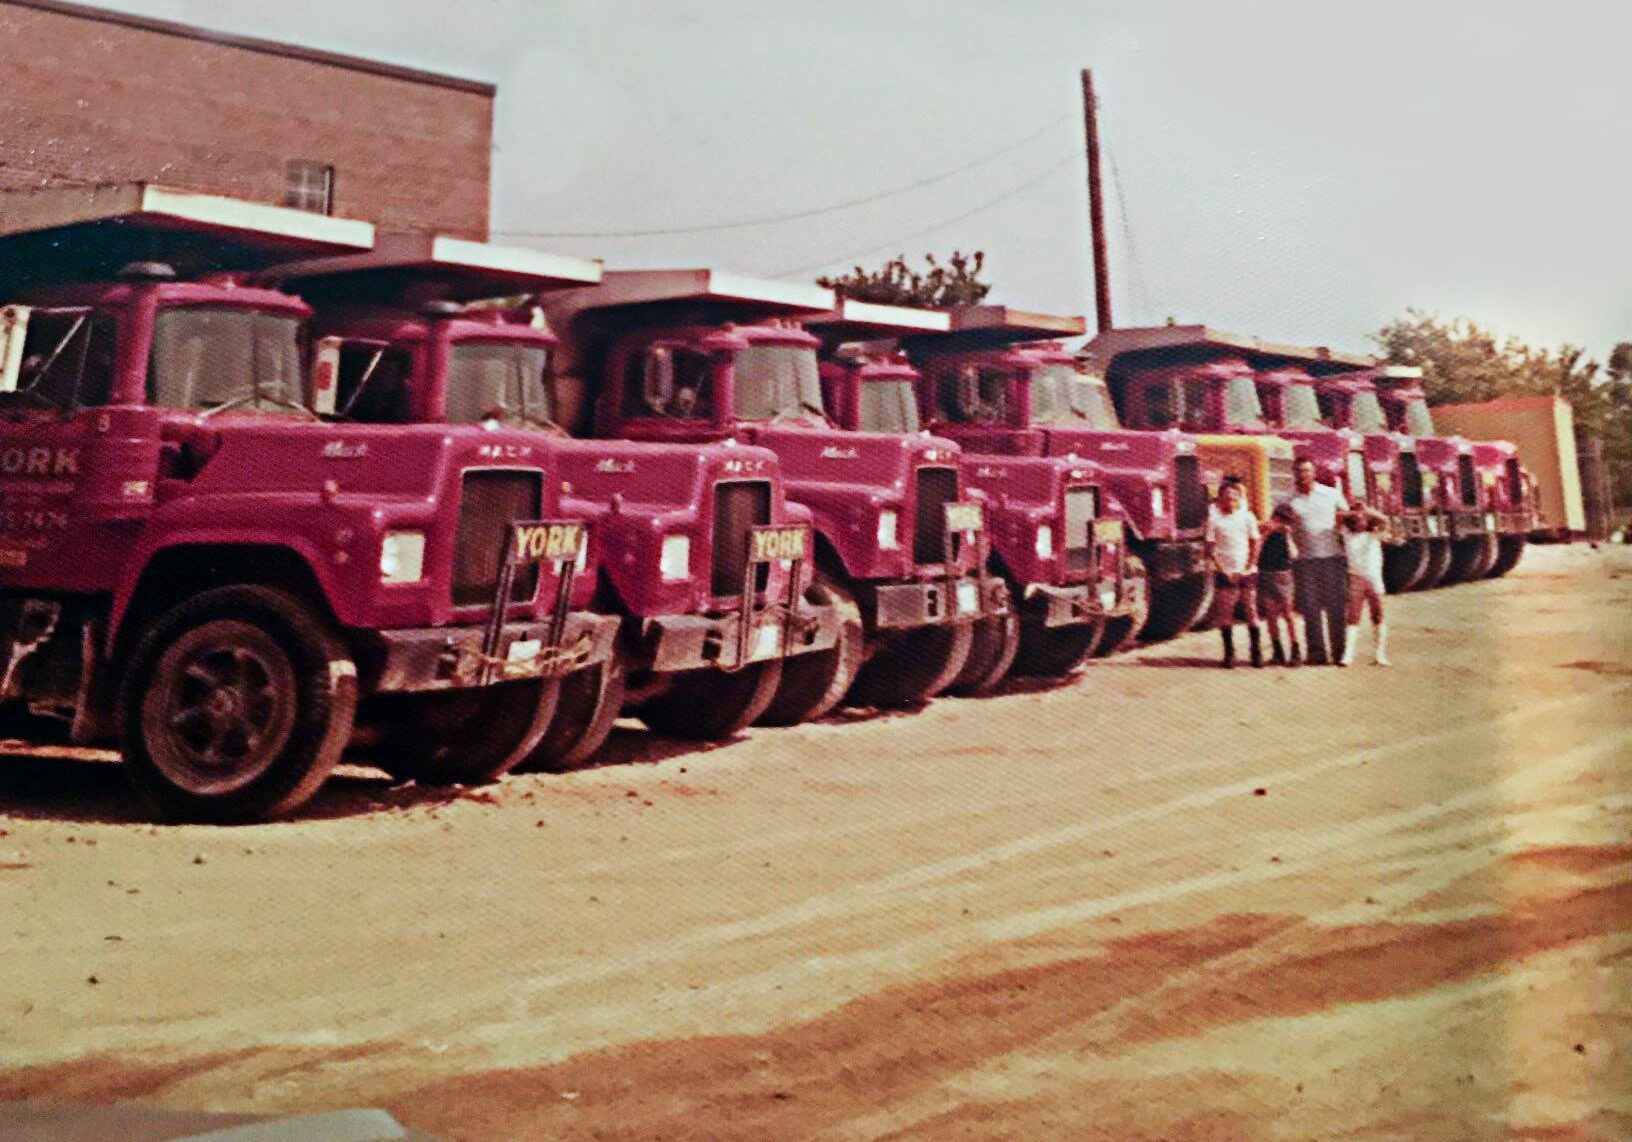 Vintage style photo. Row of red York trucks parked on a dirt driveway with Santo, York's founder, and his three sons standing in front.